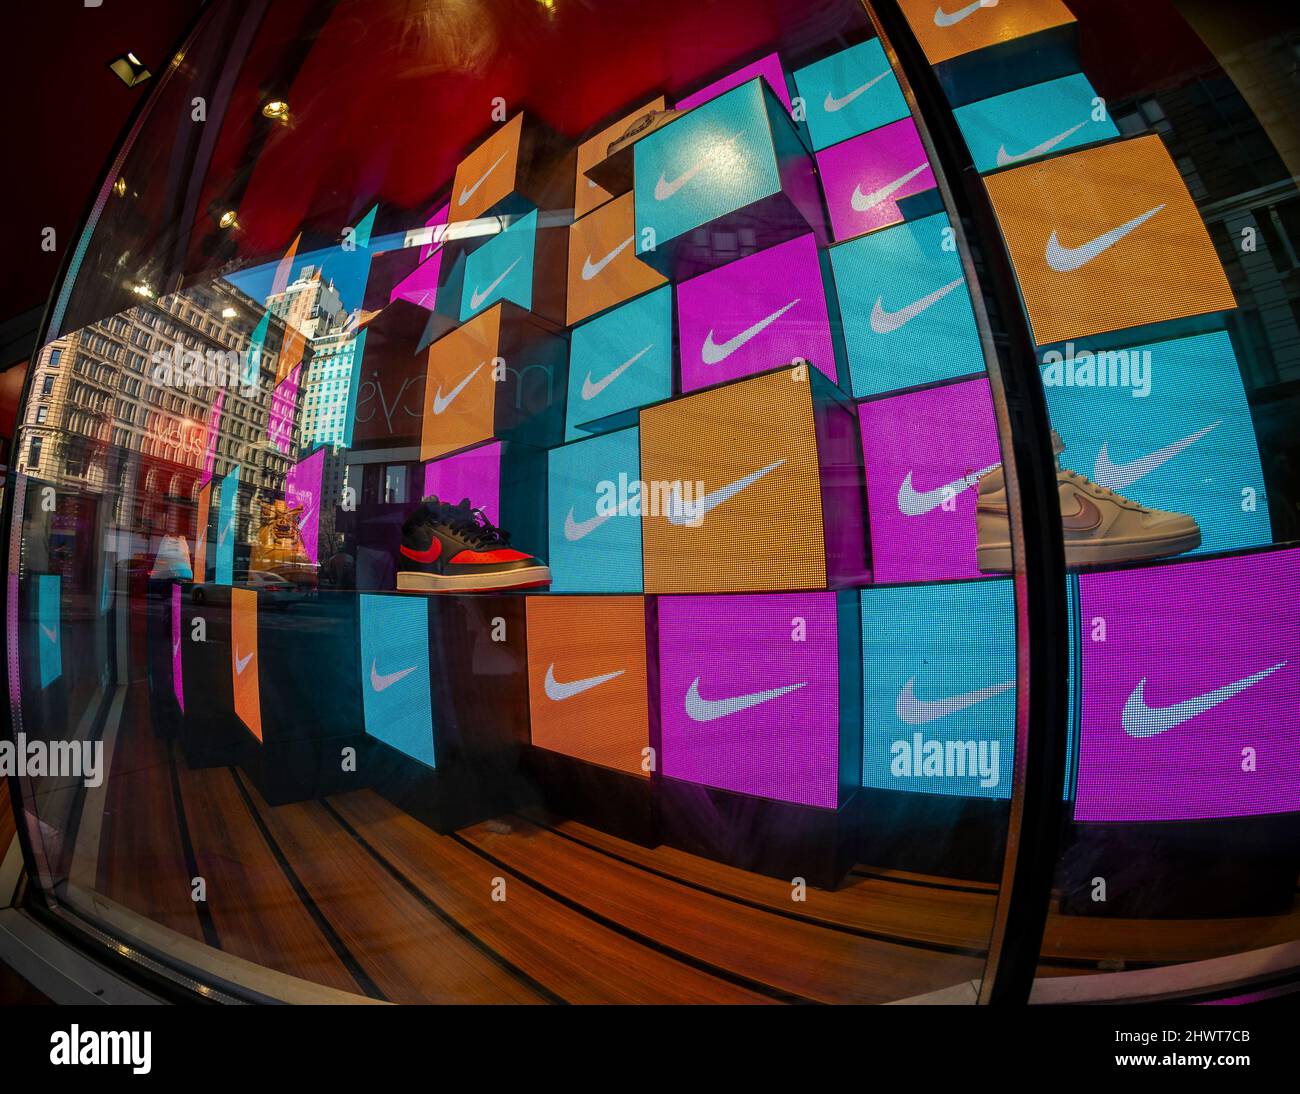 Nike Shoes Display High Resolution Stock Photography and Images - Alamy